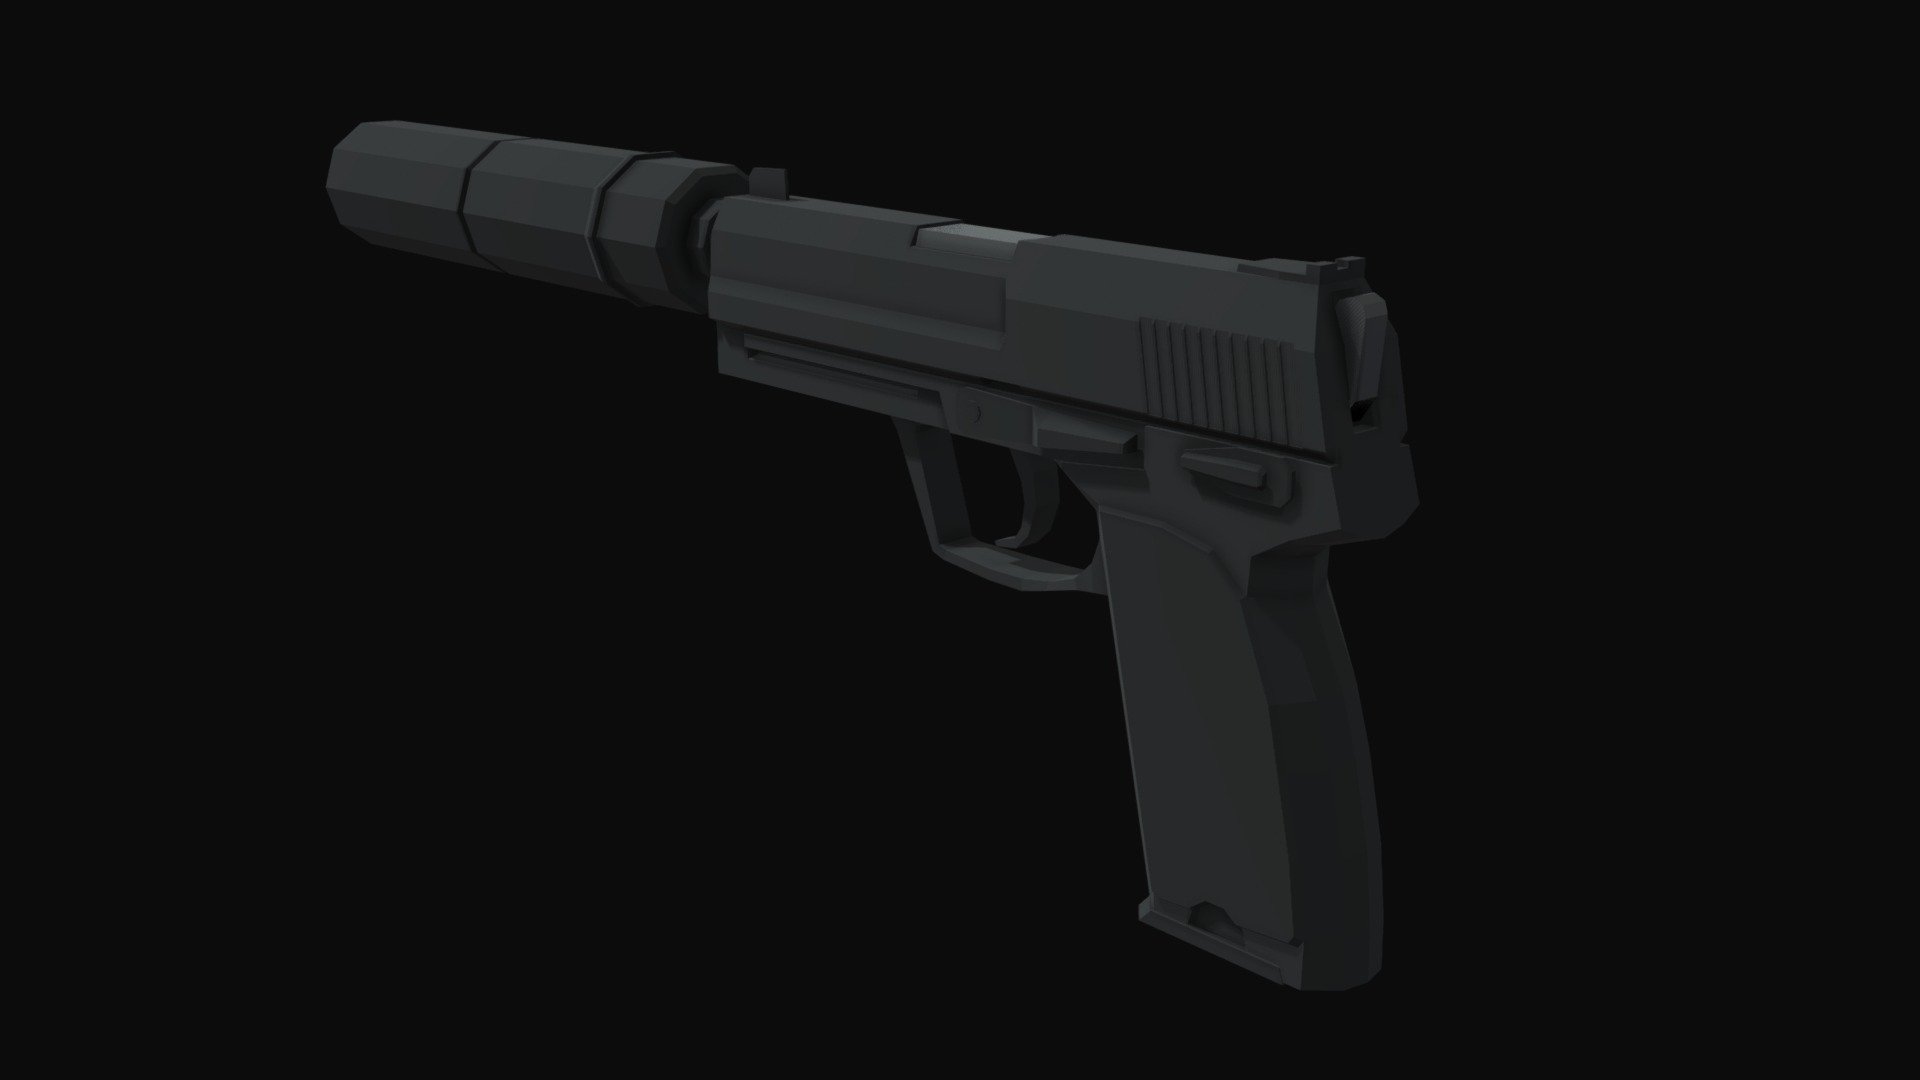 A low poly model of a USP-S

Slide Moves

Ideal for for use in games

Tested in unity. Simply drag and drop into unity to use

Made in blender - USP-S Low Poly - Buy Royalty Free 3D model by Castletyne 3d model